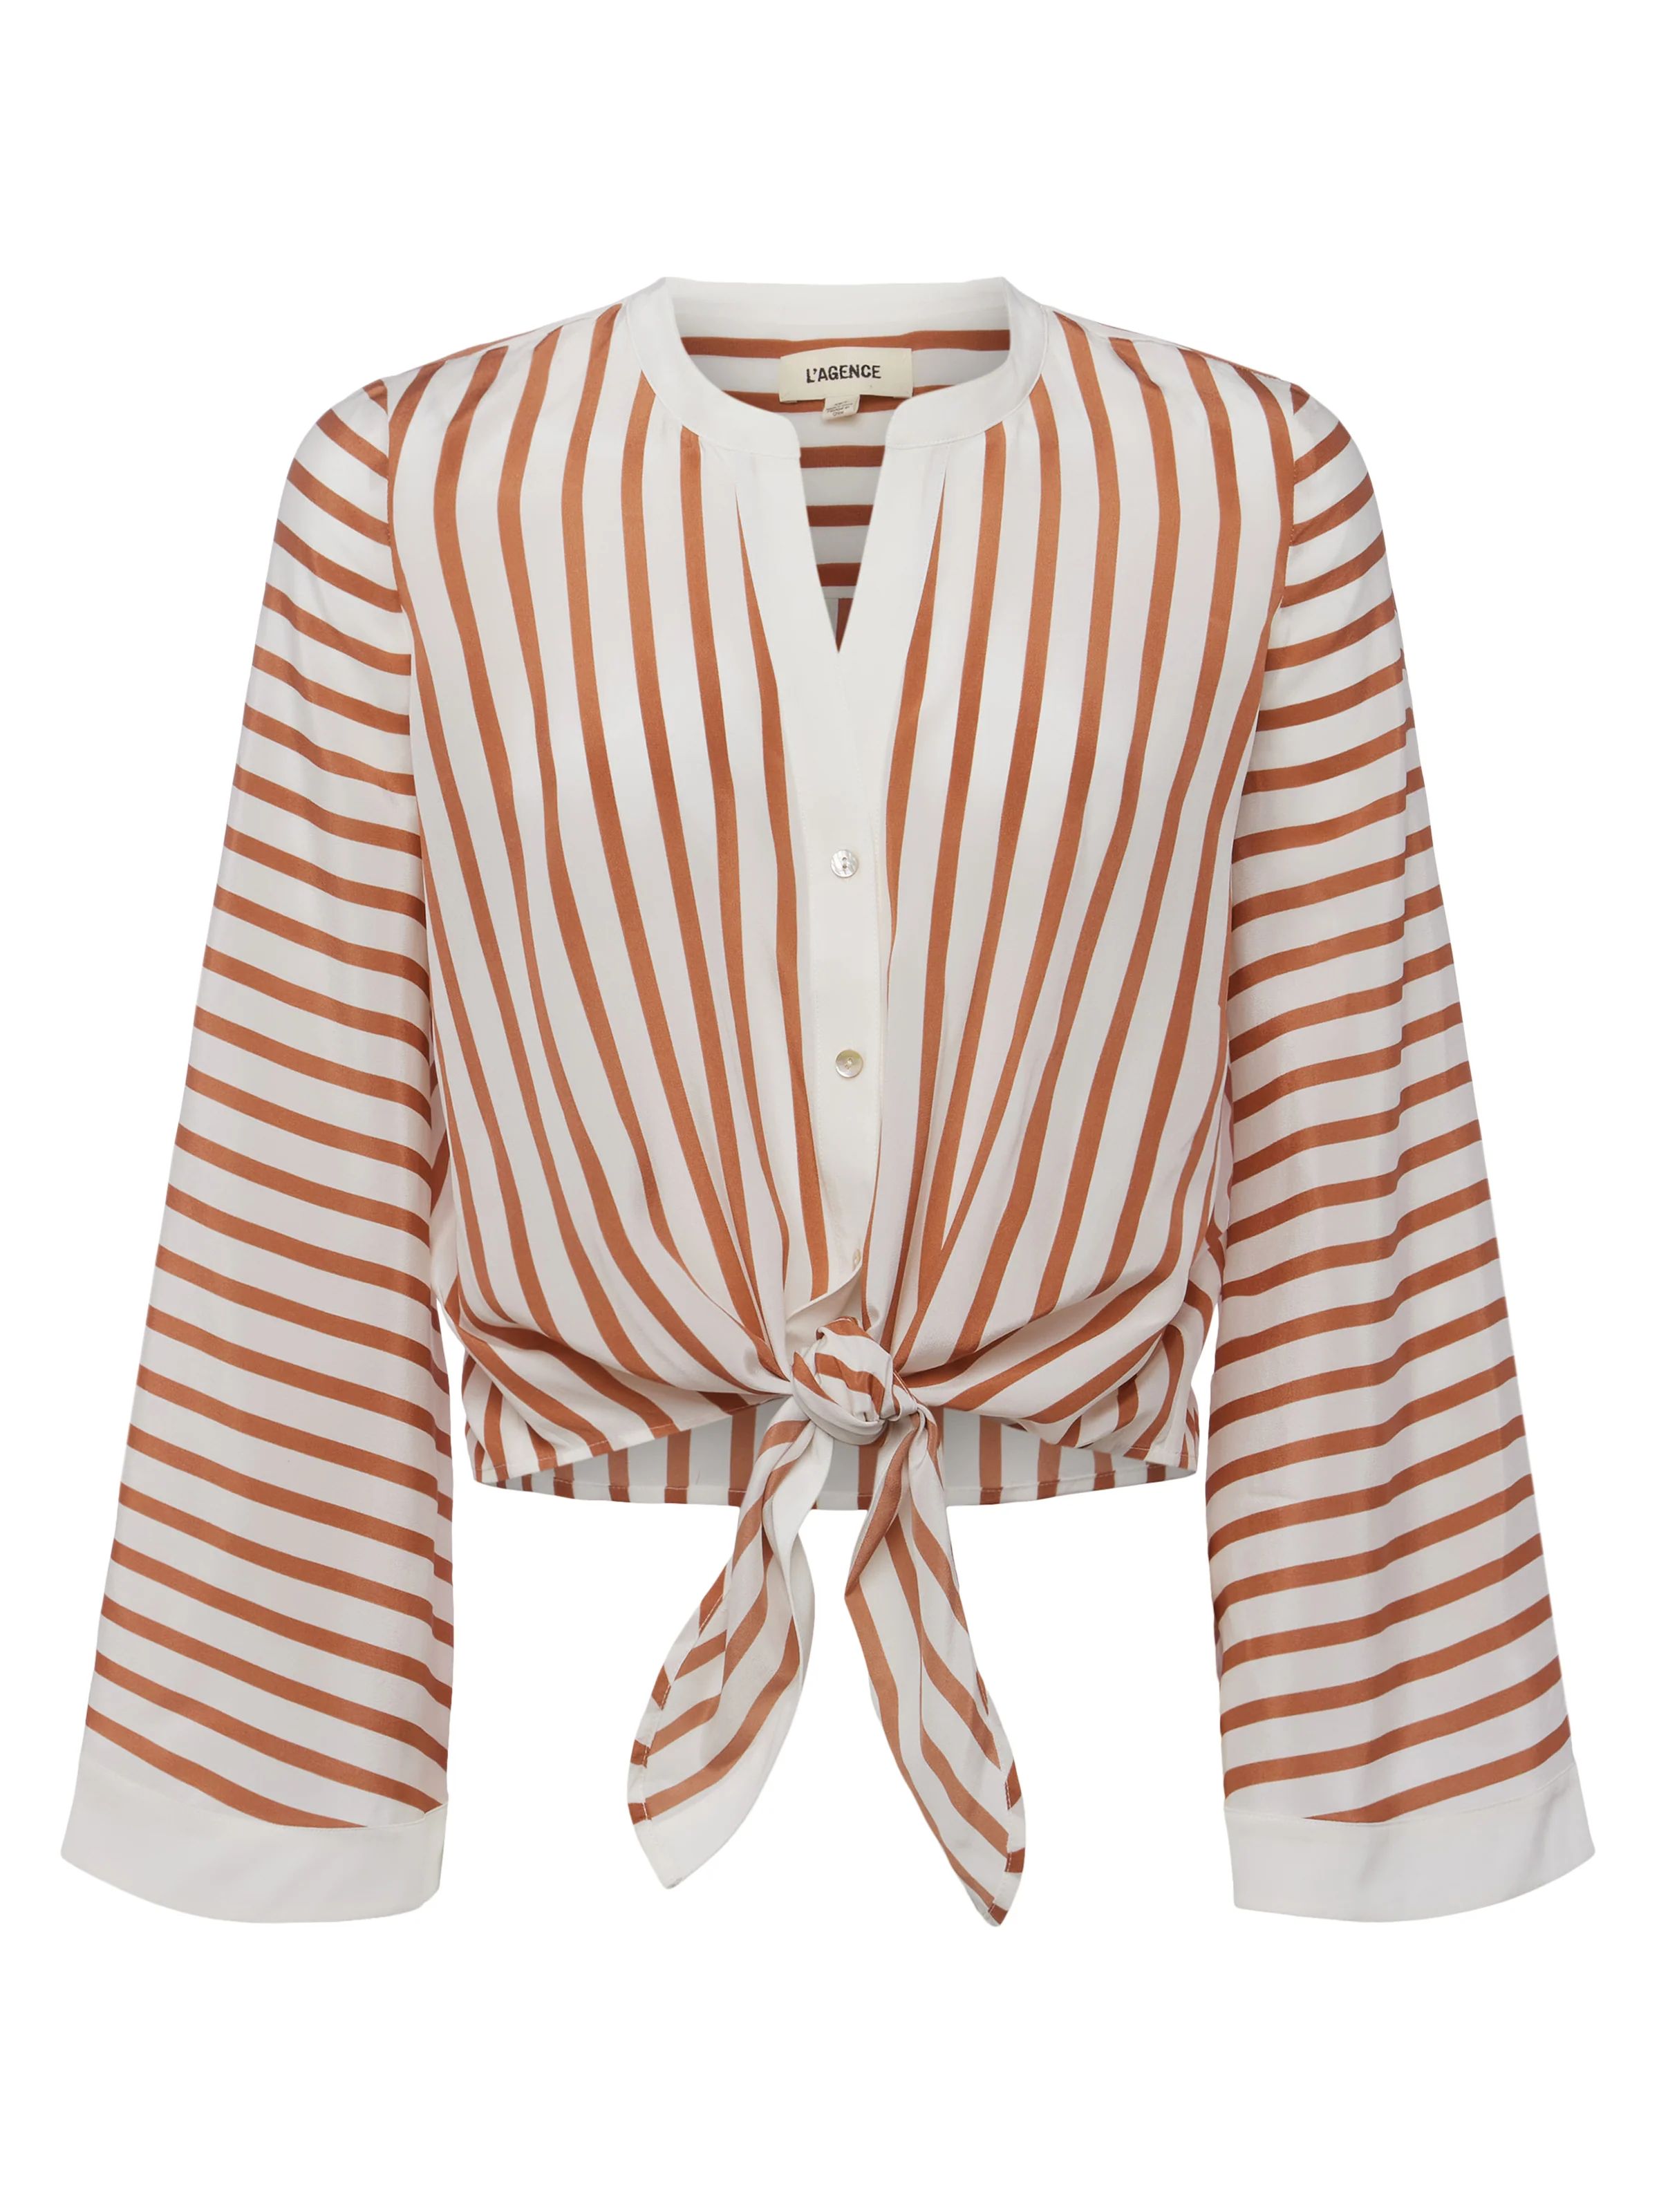 L'AGENCE Charlize Blouse in Soft Tan/Ivory Stripe | L'Agence